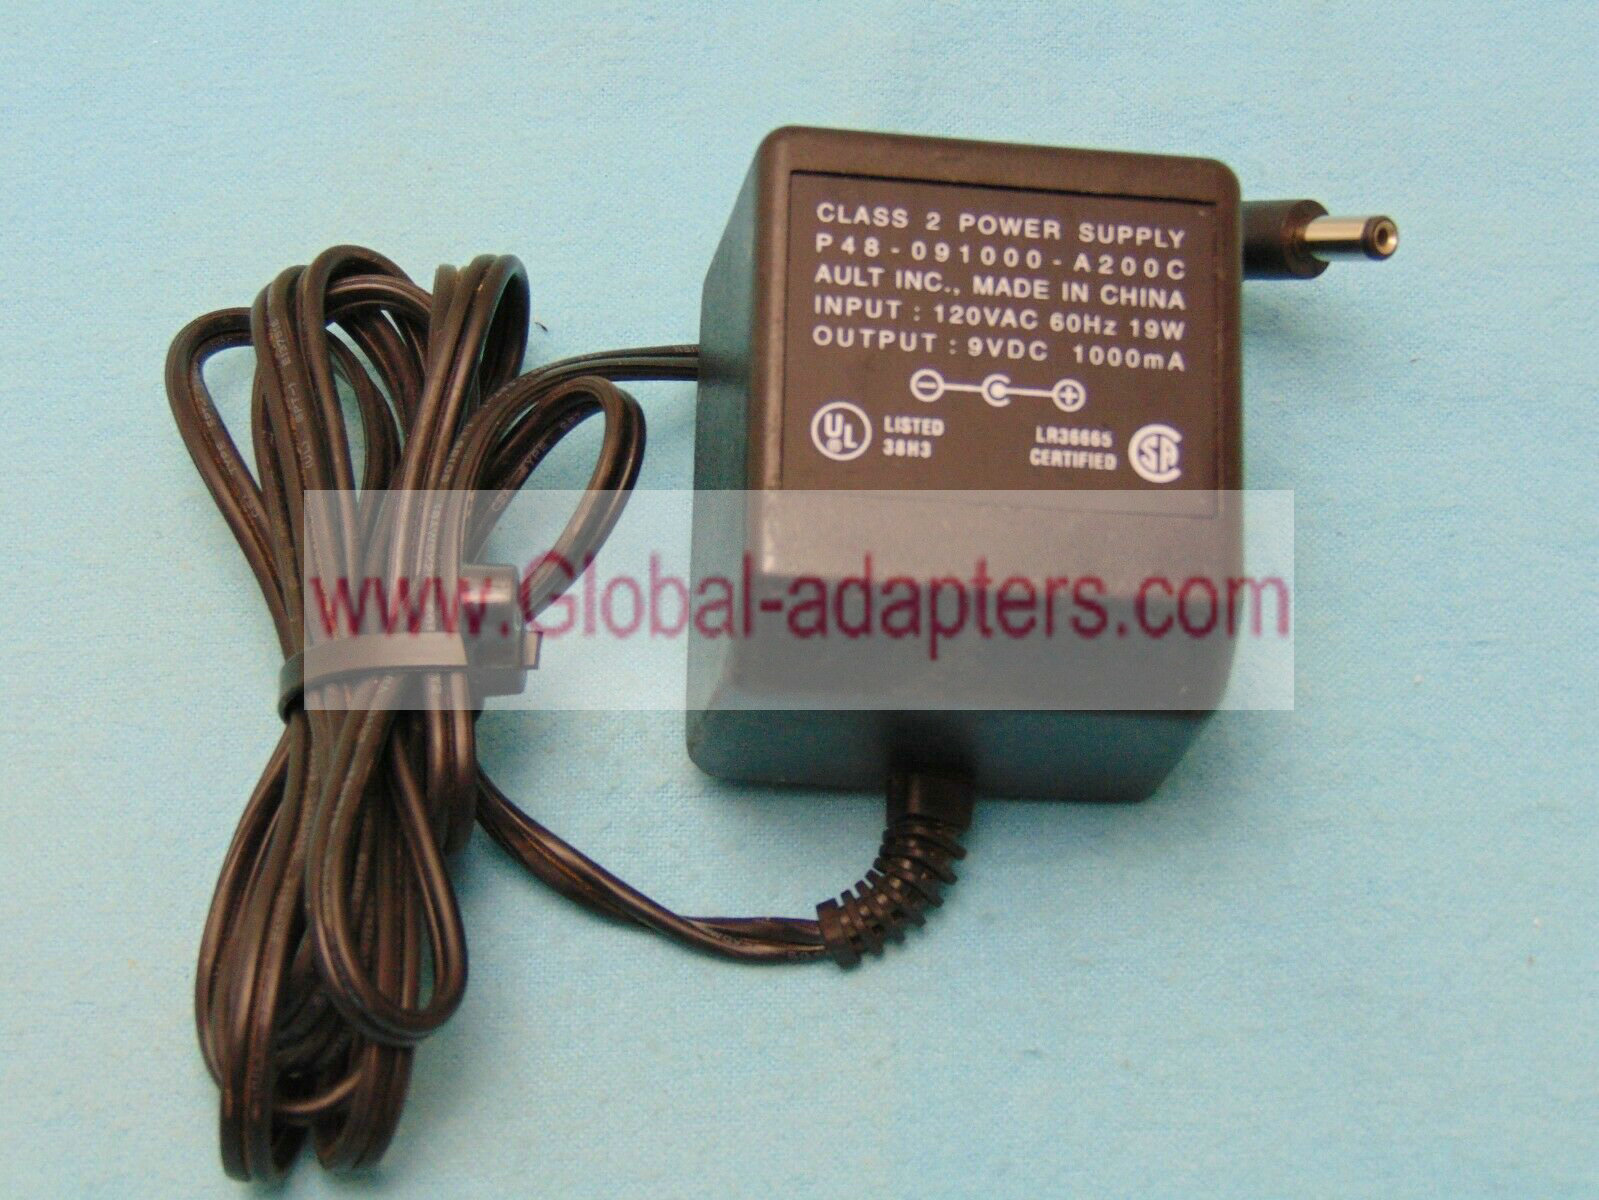 Ault Inc P48-091000-A200C Class 2 Power Supply 9vdc 1000mA ac adapter